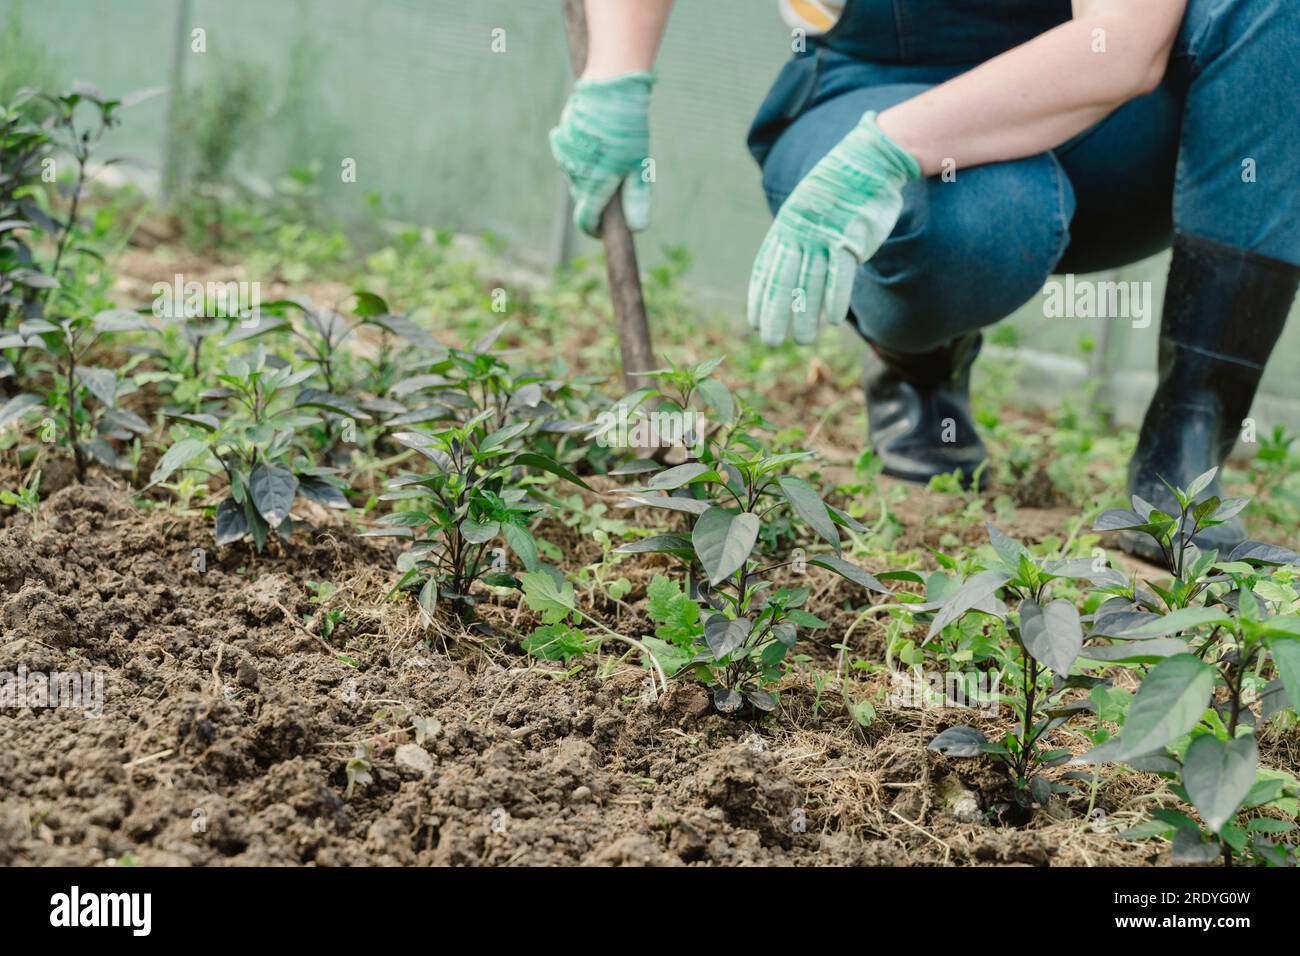 Hands of farmer digging soil in greenhouse Stock Photo